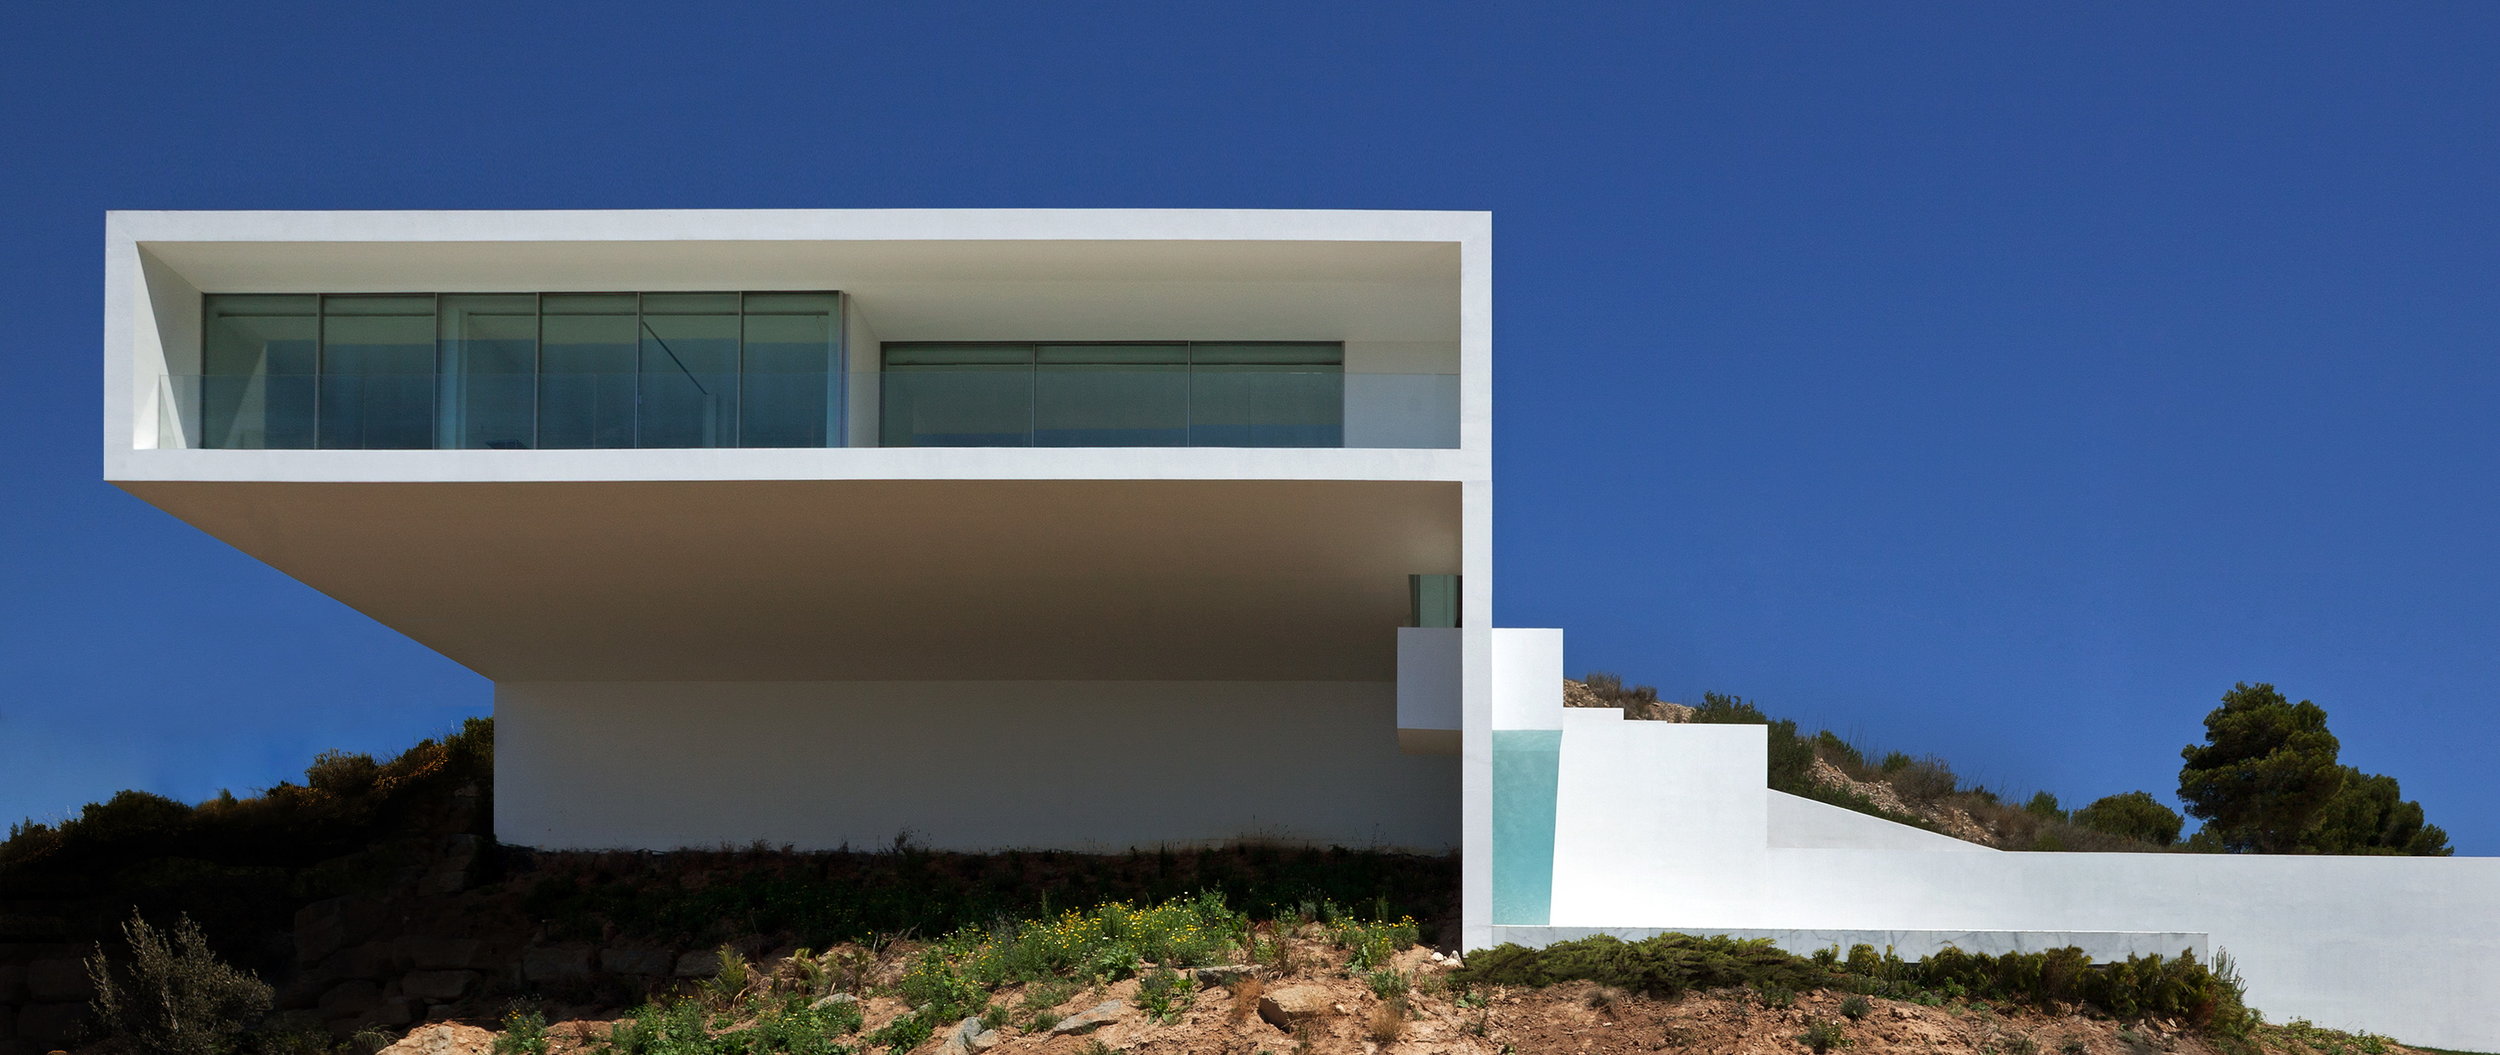 FRAN SILVESTRE ARQUITECTOS VALENCIA - HOUSE ON THE CLIFF -  IMG ARQUITECTURA - 02.jpg